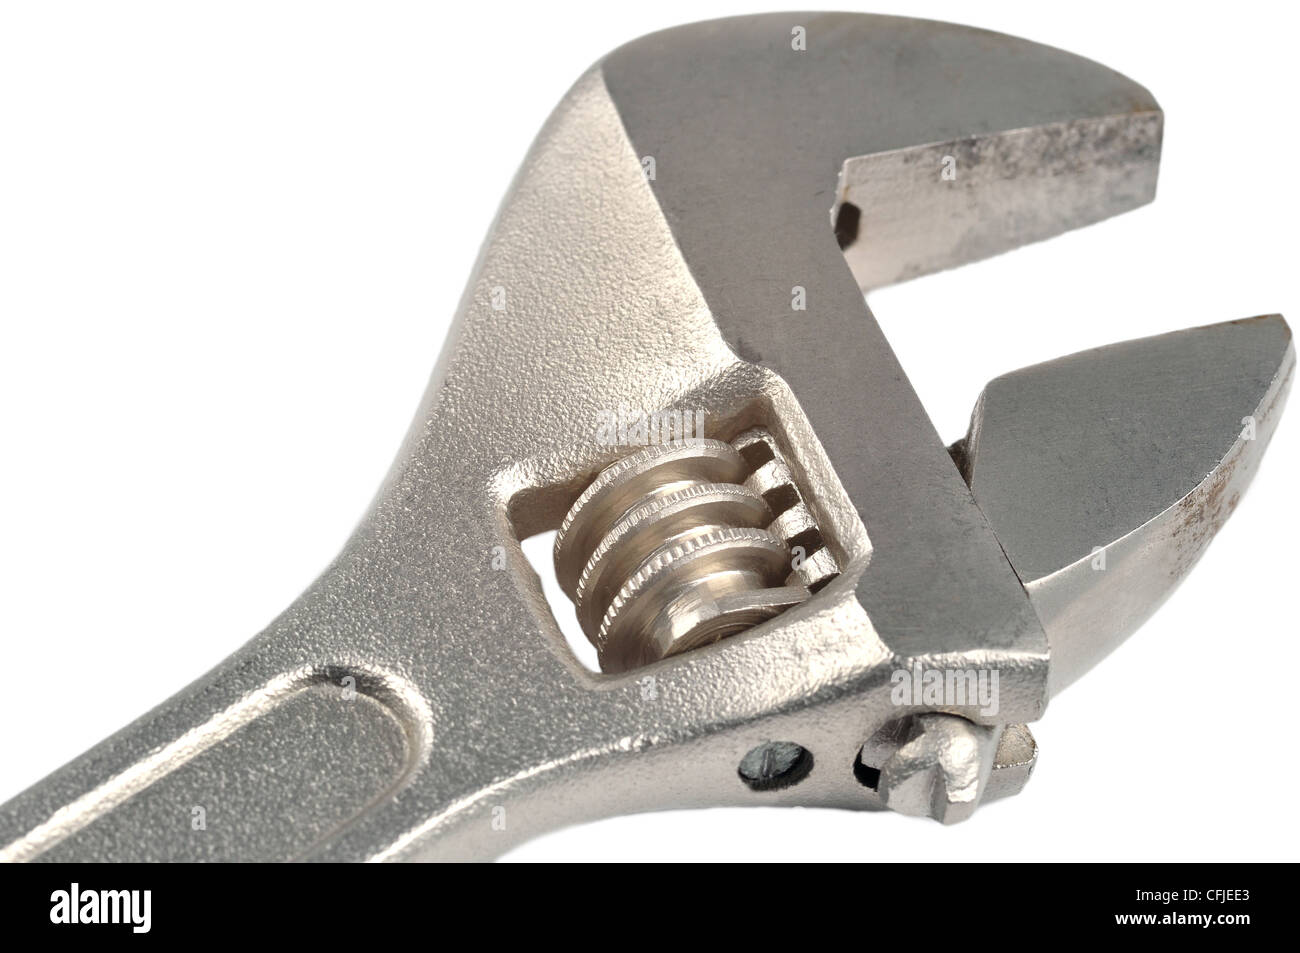 Closeup of a wrench on a white background Stock Photo